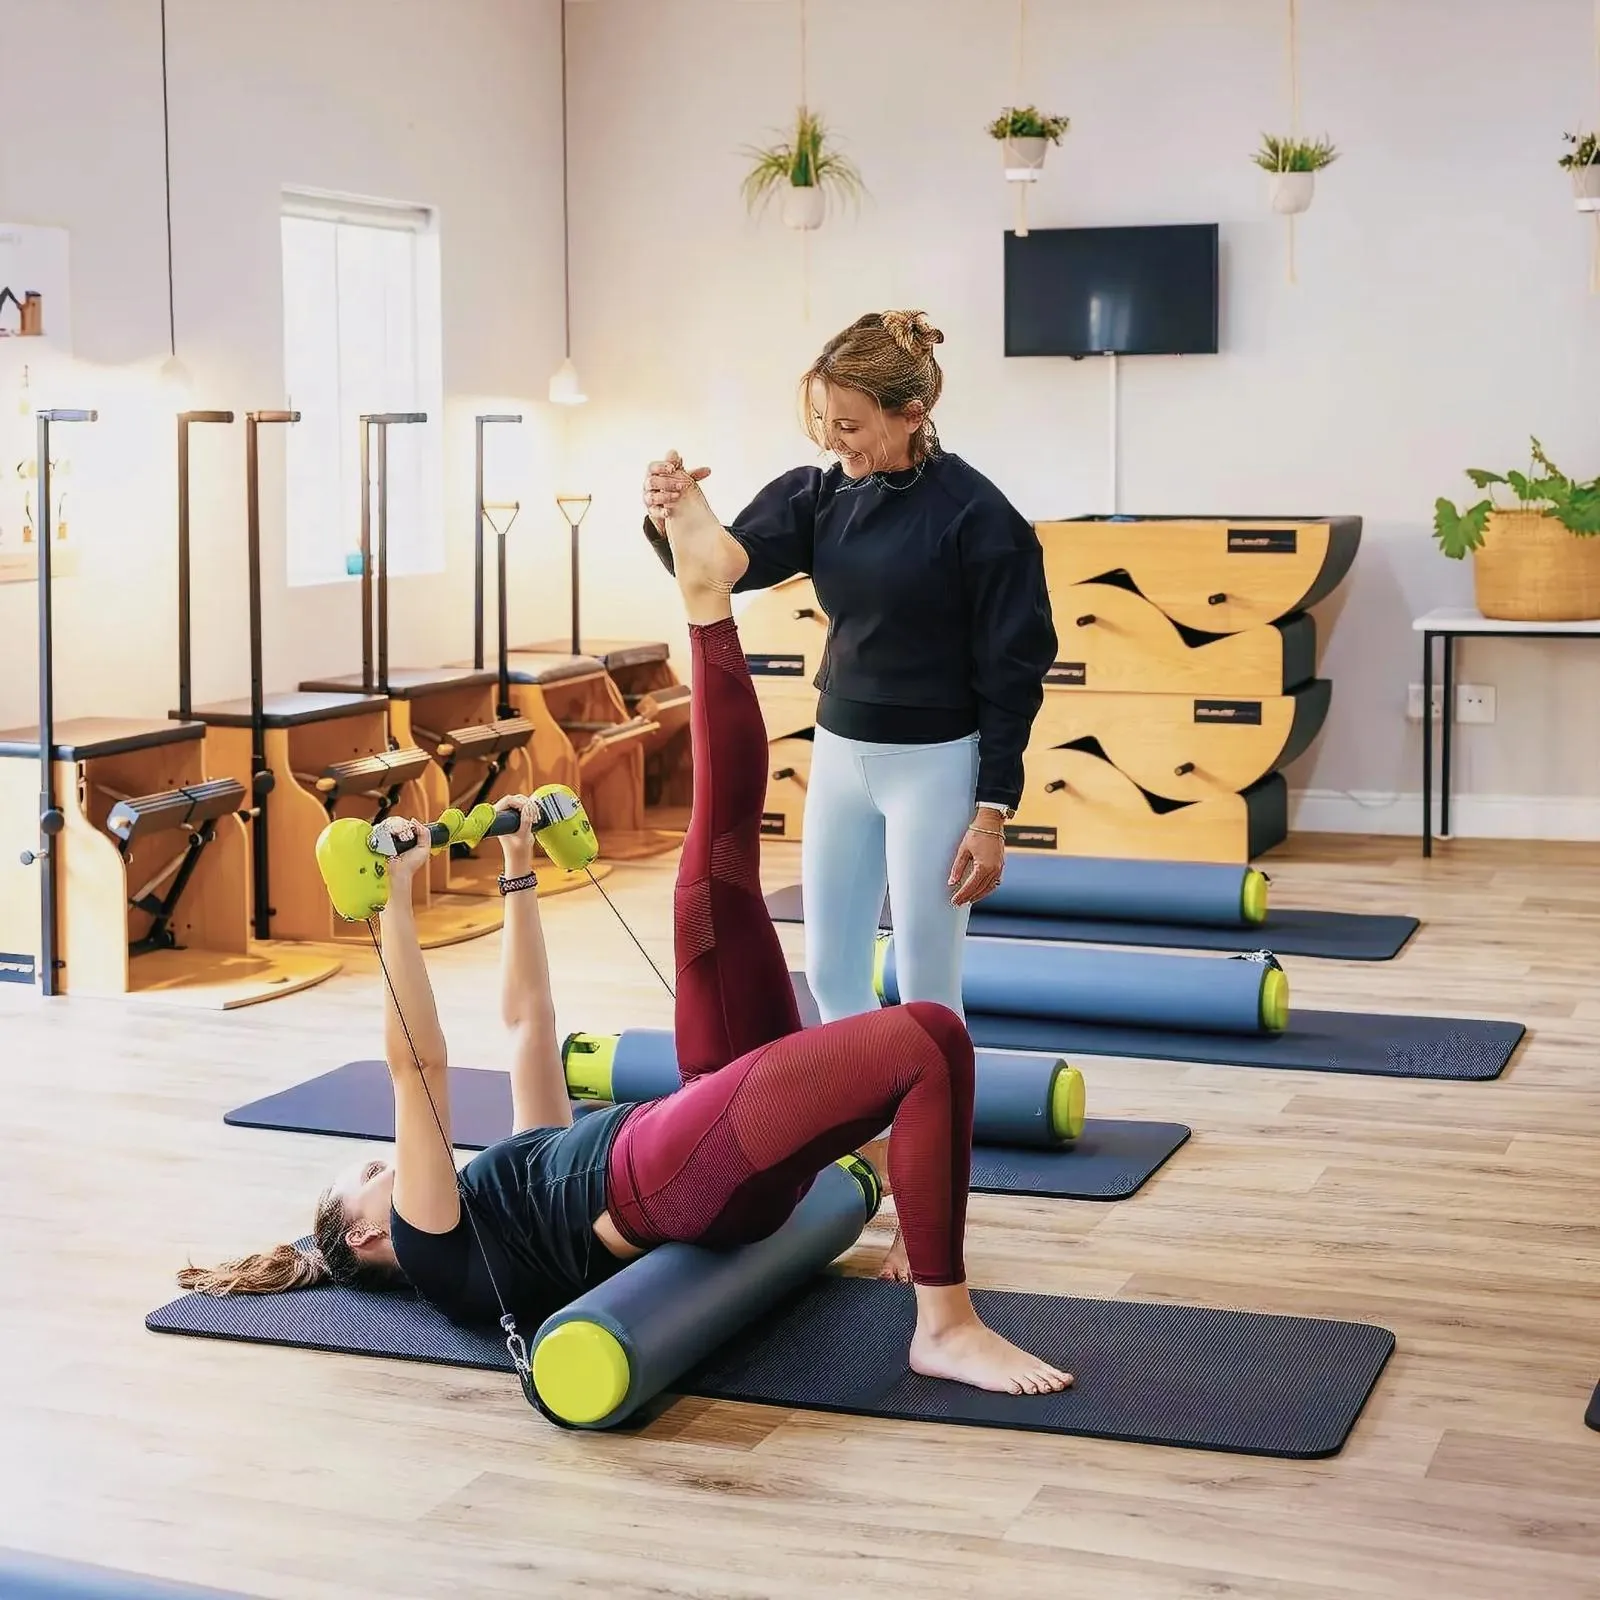 Two women engaging in a fitness session at Paarl Pilates studio.